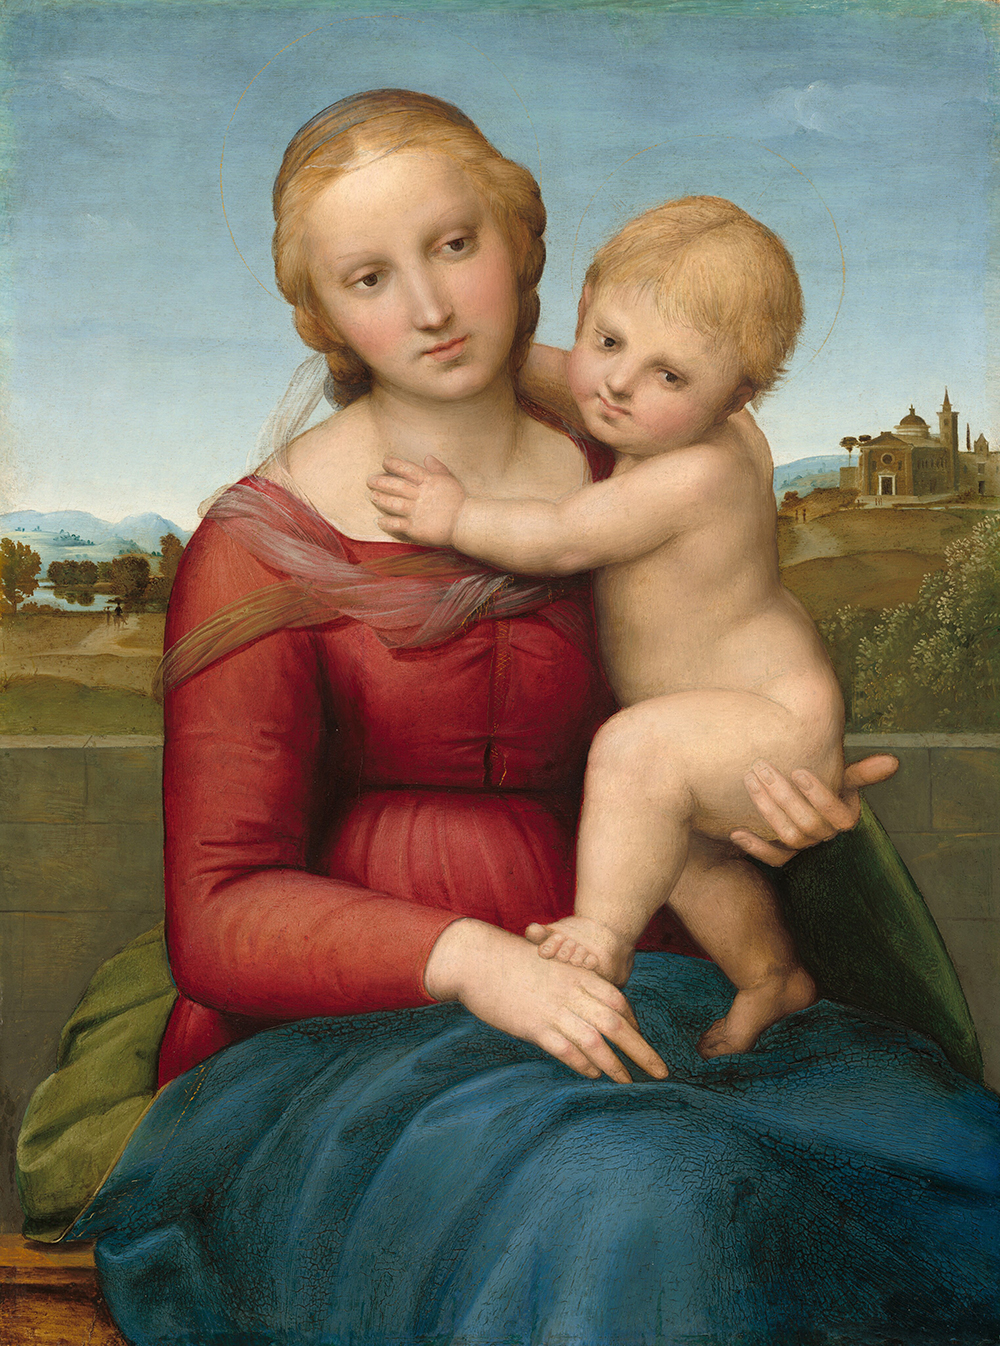 A woman and nude child, both with pale skin, sit in front of a deep landscape in this vertical painting. Seen from about the knees up, the woman’s body is angled slightly to our and she supports the baby under his bottom with her left hand, on our right. She wears a long-sleeved crimson dress with a sheer, nearly translucent fabric around her shoulders.